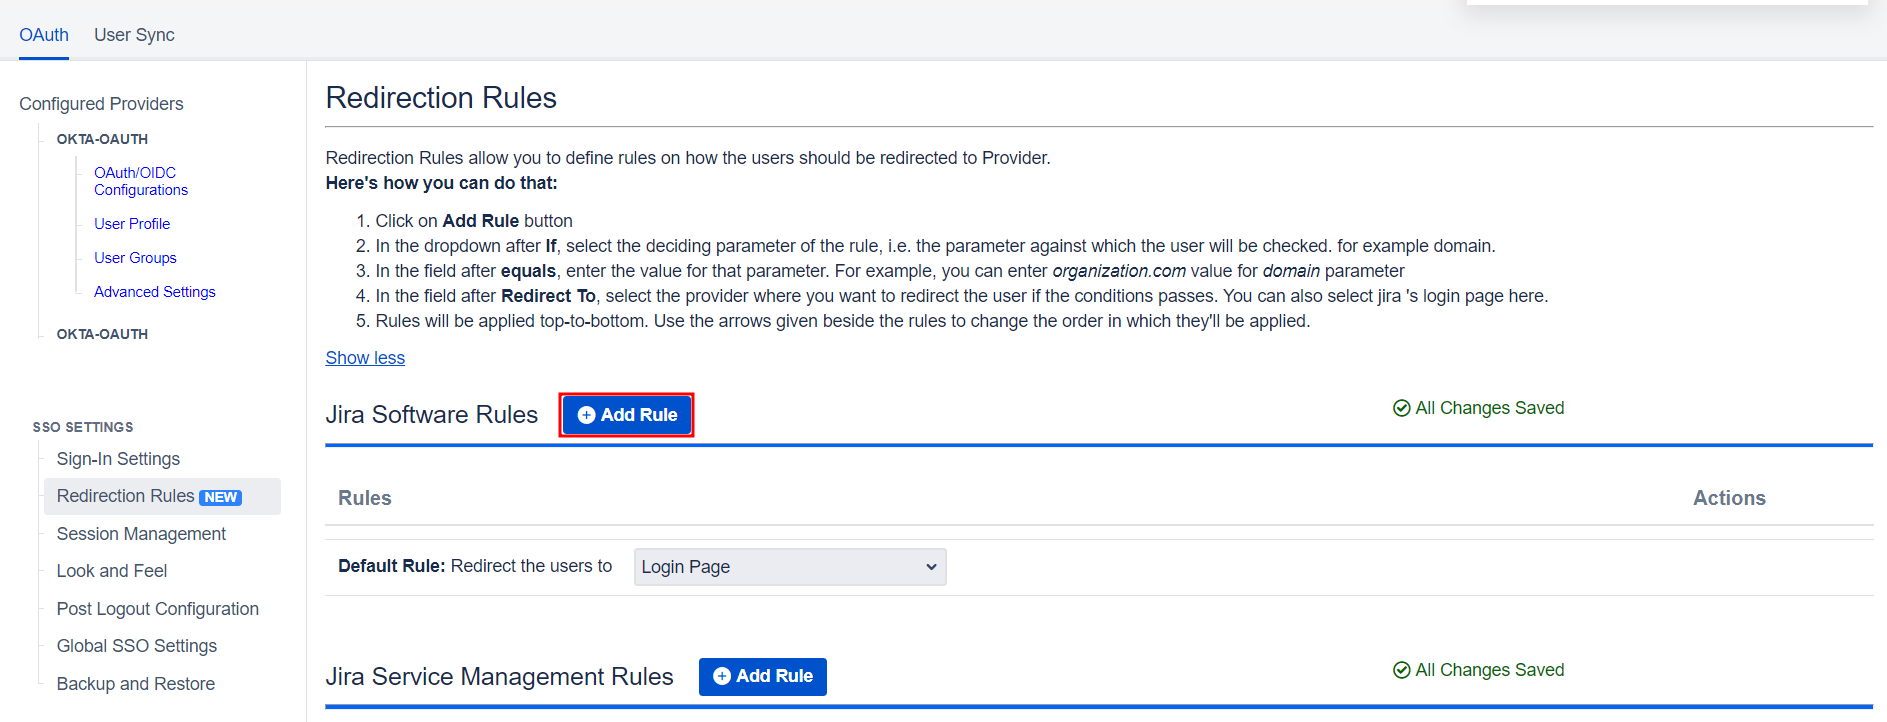 OAuth / OpenID Single Sign On (SSO) into Jira, Redirection Rules tab with provision for creating new rule